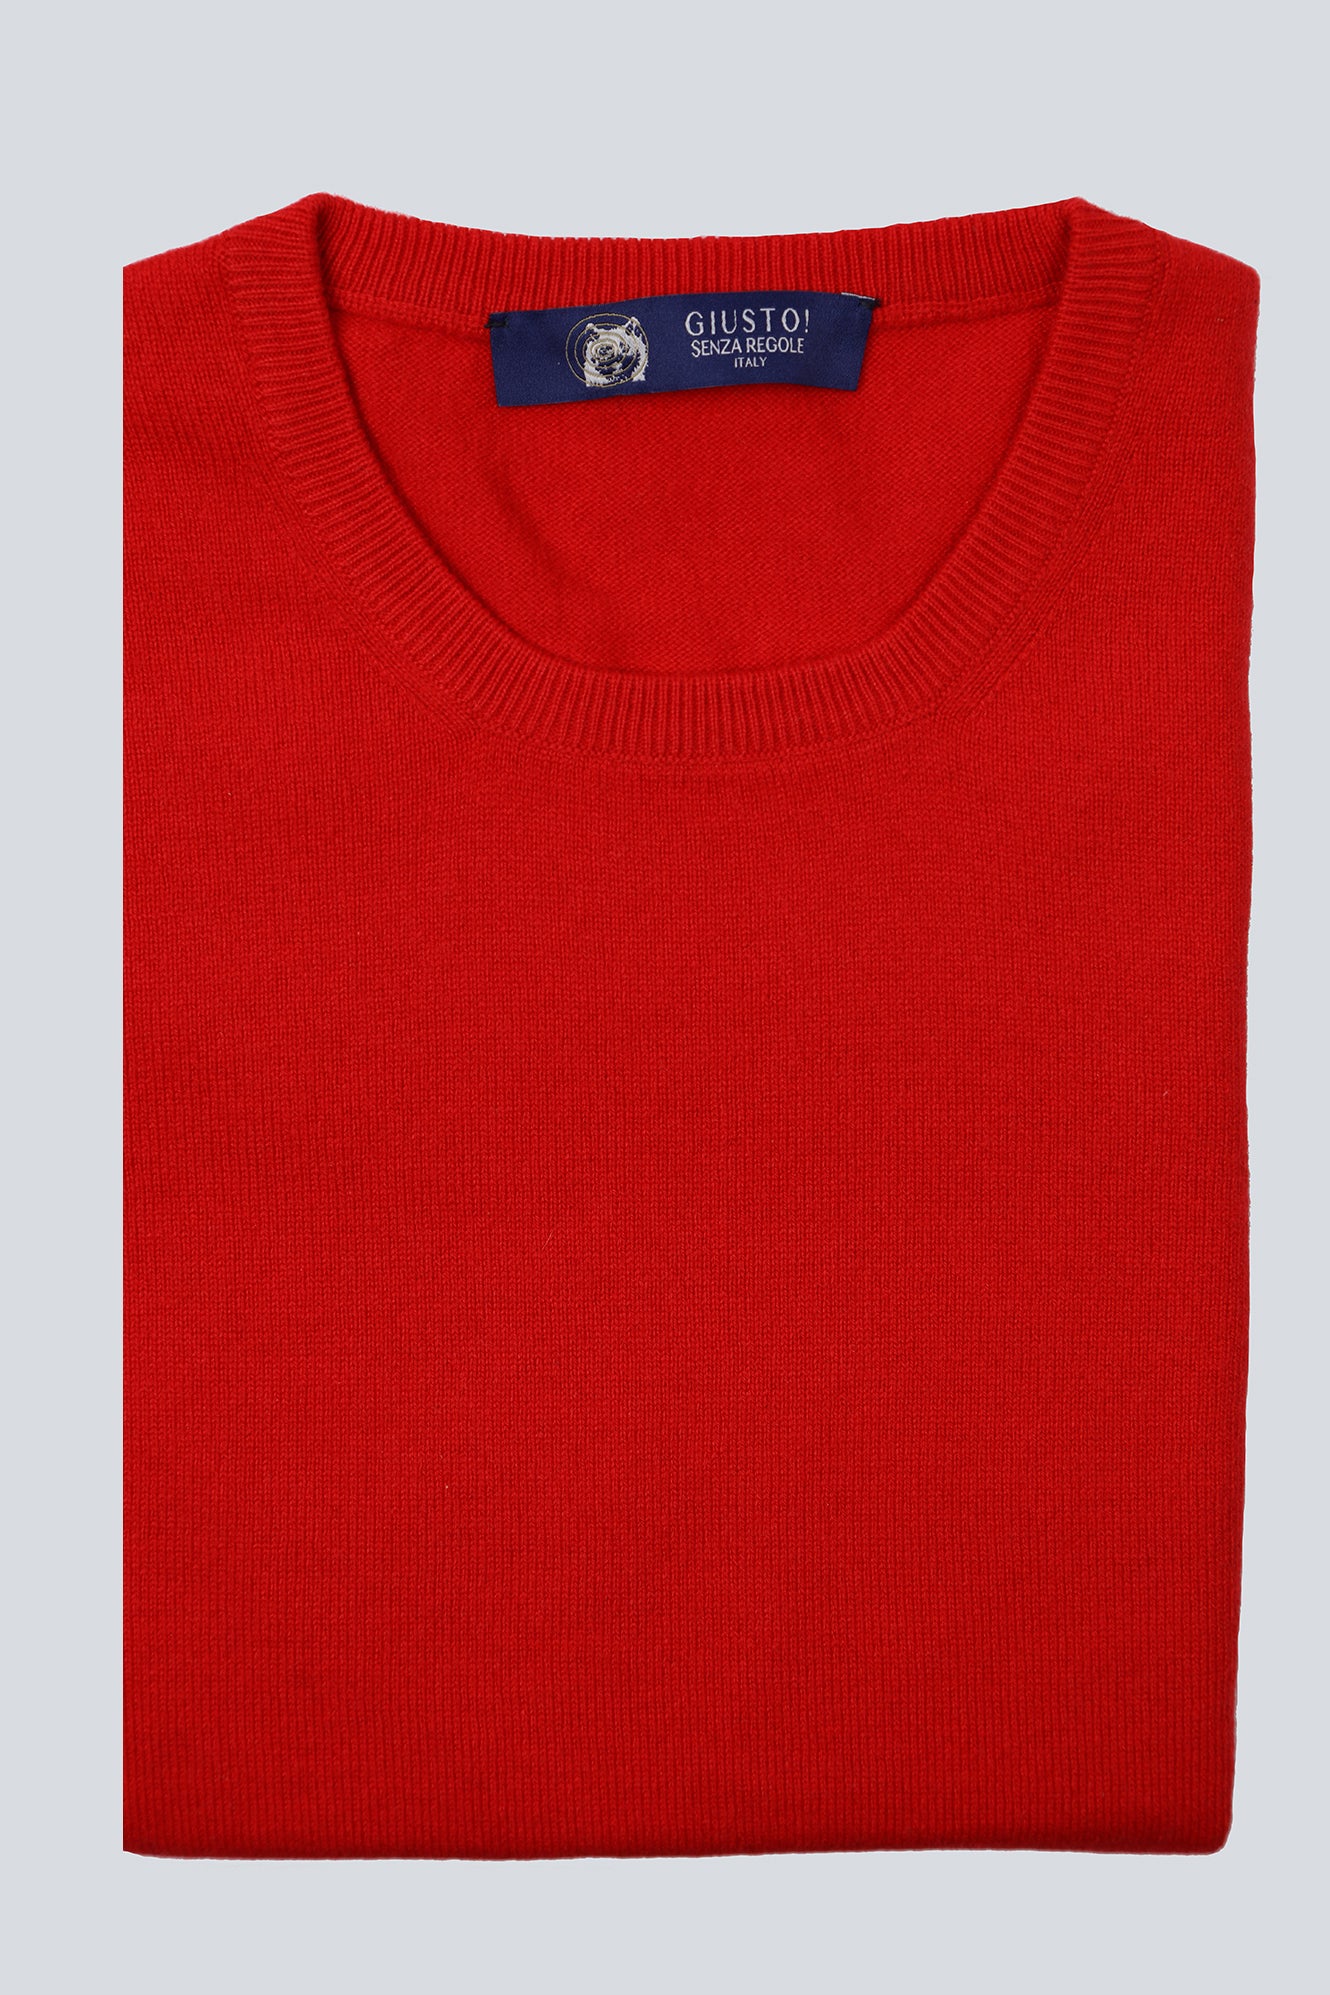 Venetian Red Cashmere Sweater